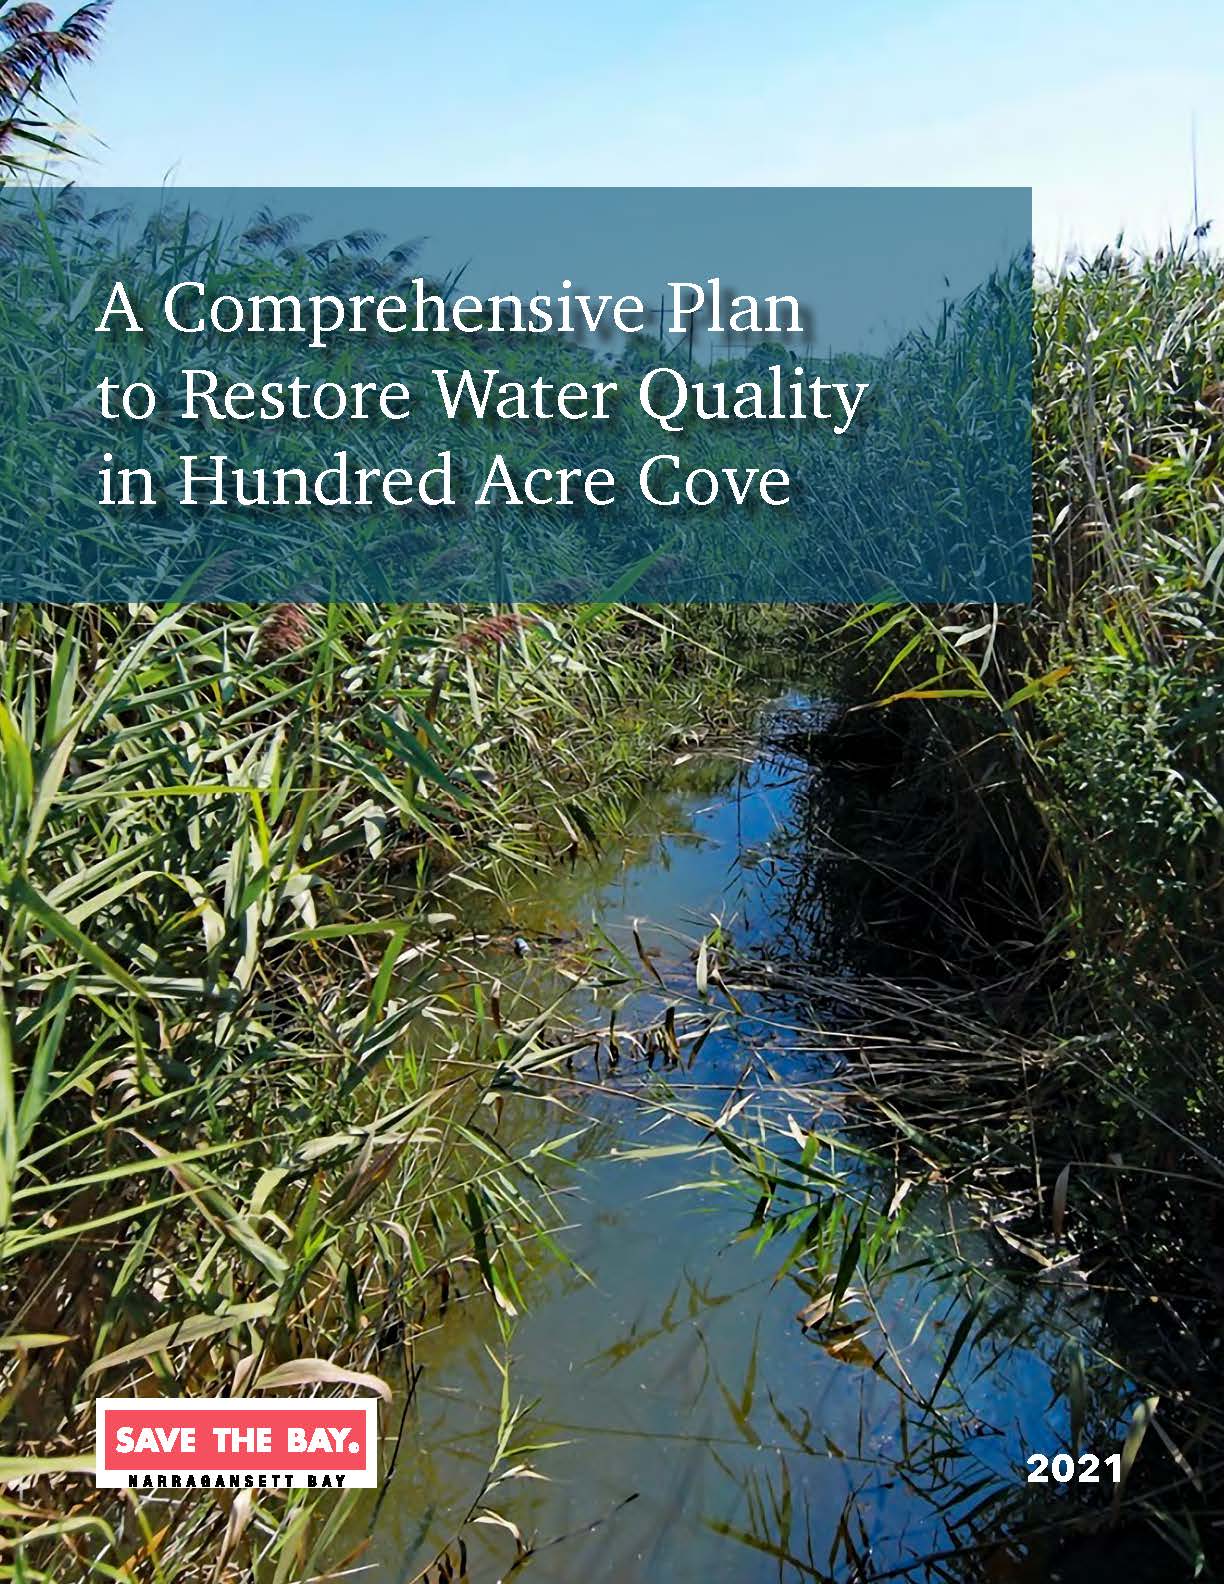 A semi-transparent blue window sits in the upper left corner with white text reading, "A Comprehensive Plan to Restore Qater Quality to Hundred Acre Cove." A background image featuring a narrow stream weaving its way through the reeds is prominent. The Save The Bay logo in the lower left corner, mirrors the publication date, "2021" in the right. 